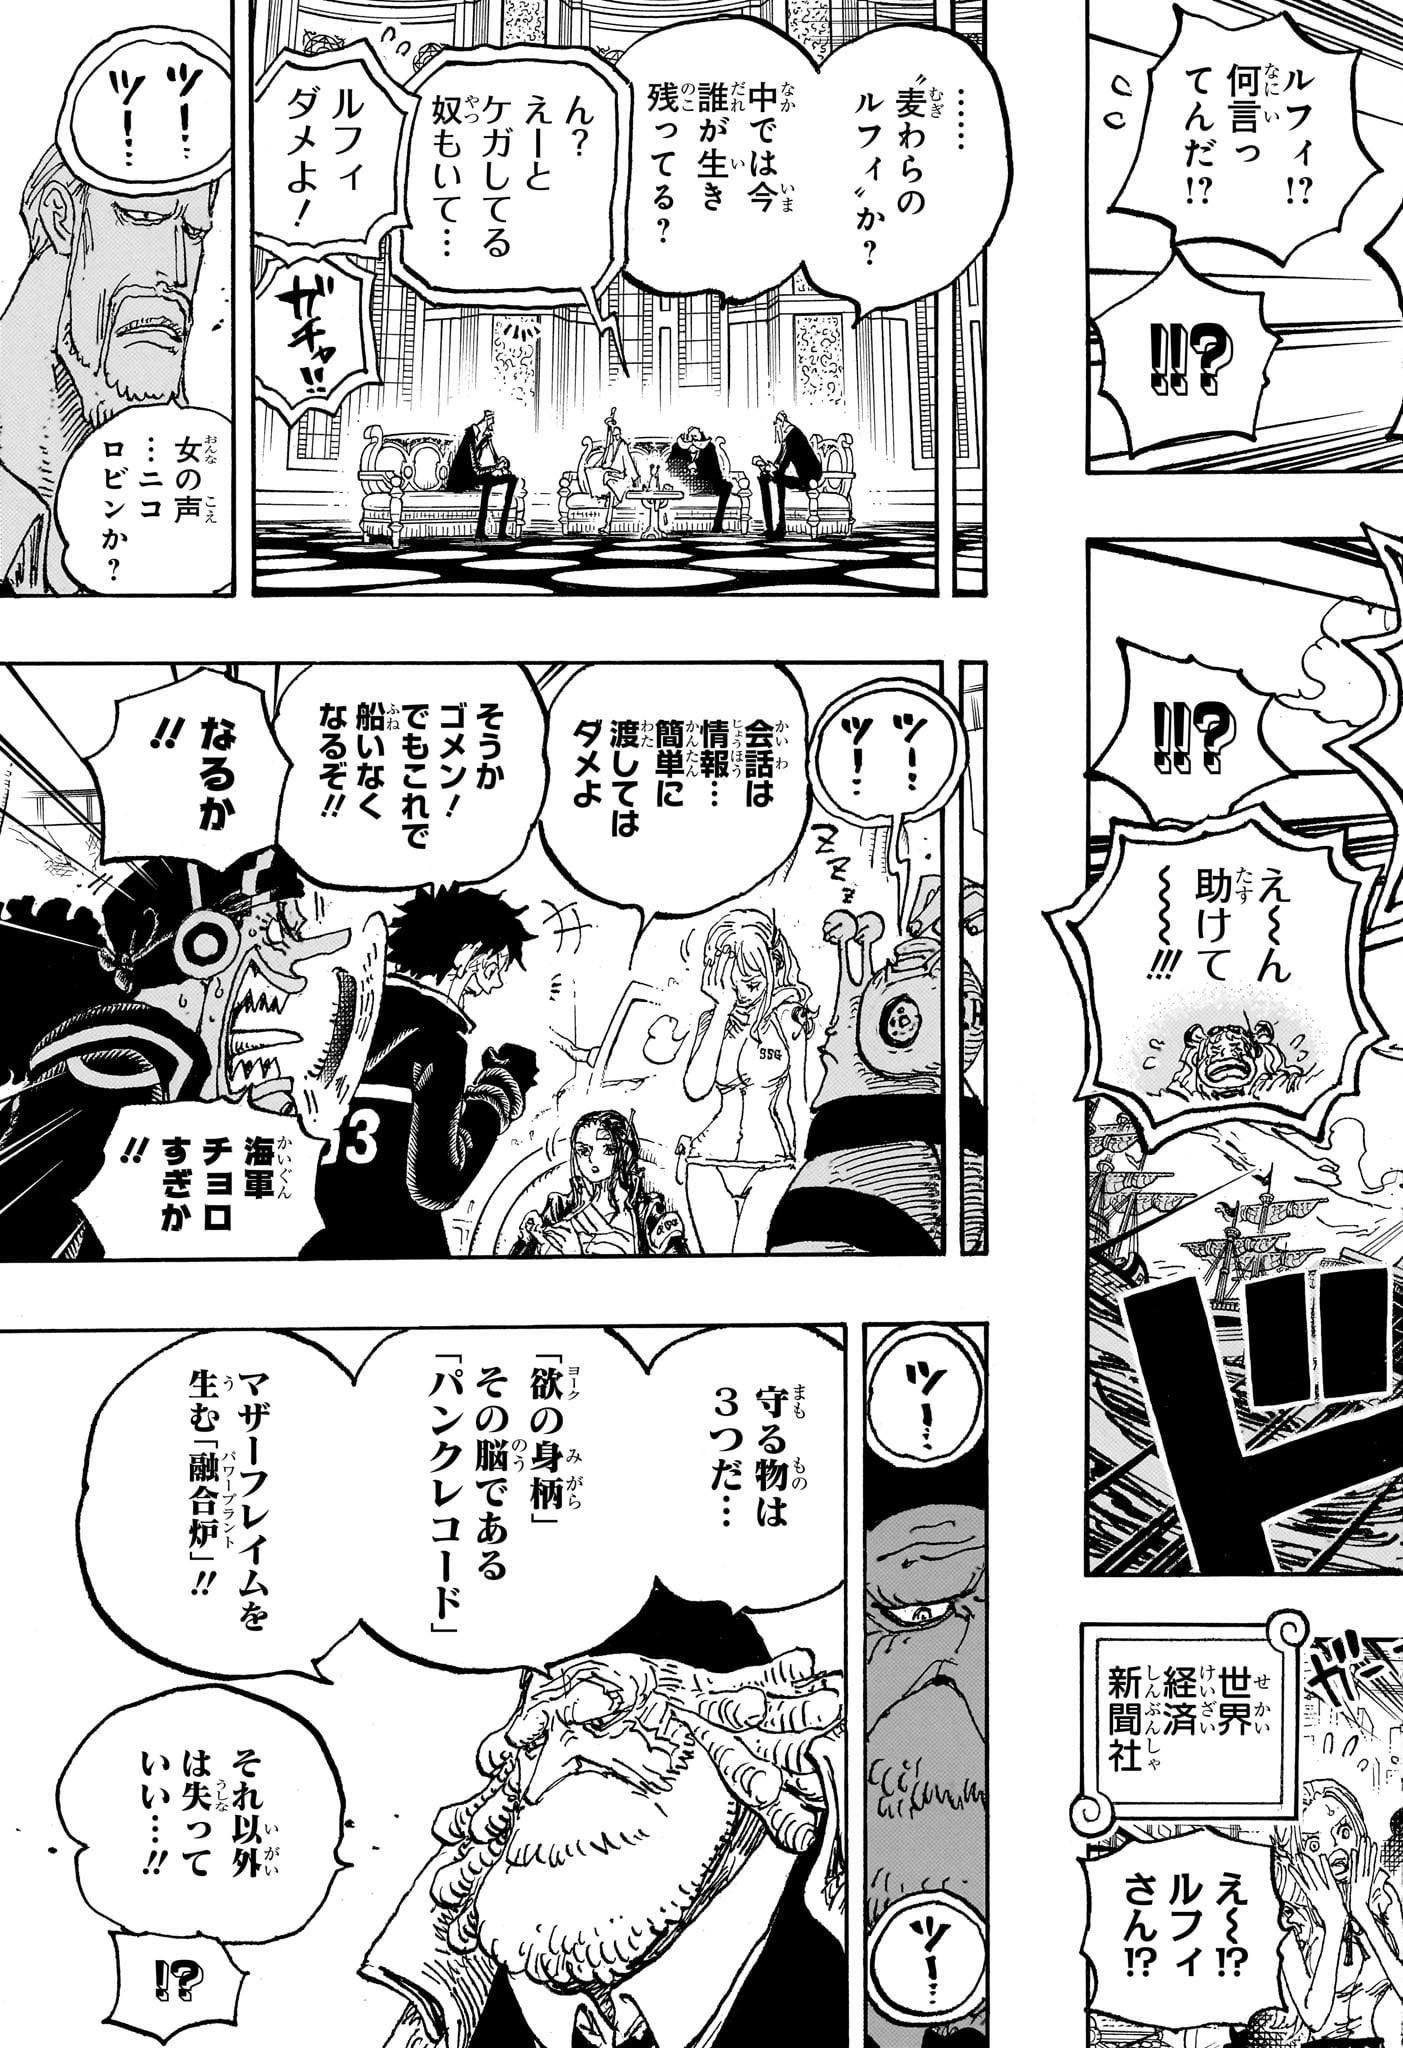 One Piece - Chapter 1090 - Page 3